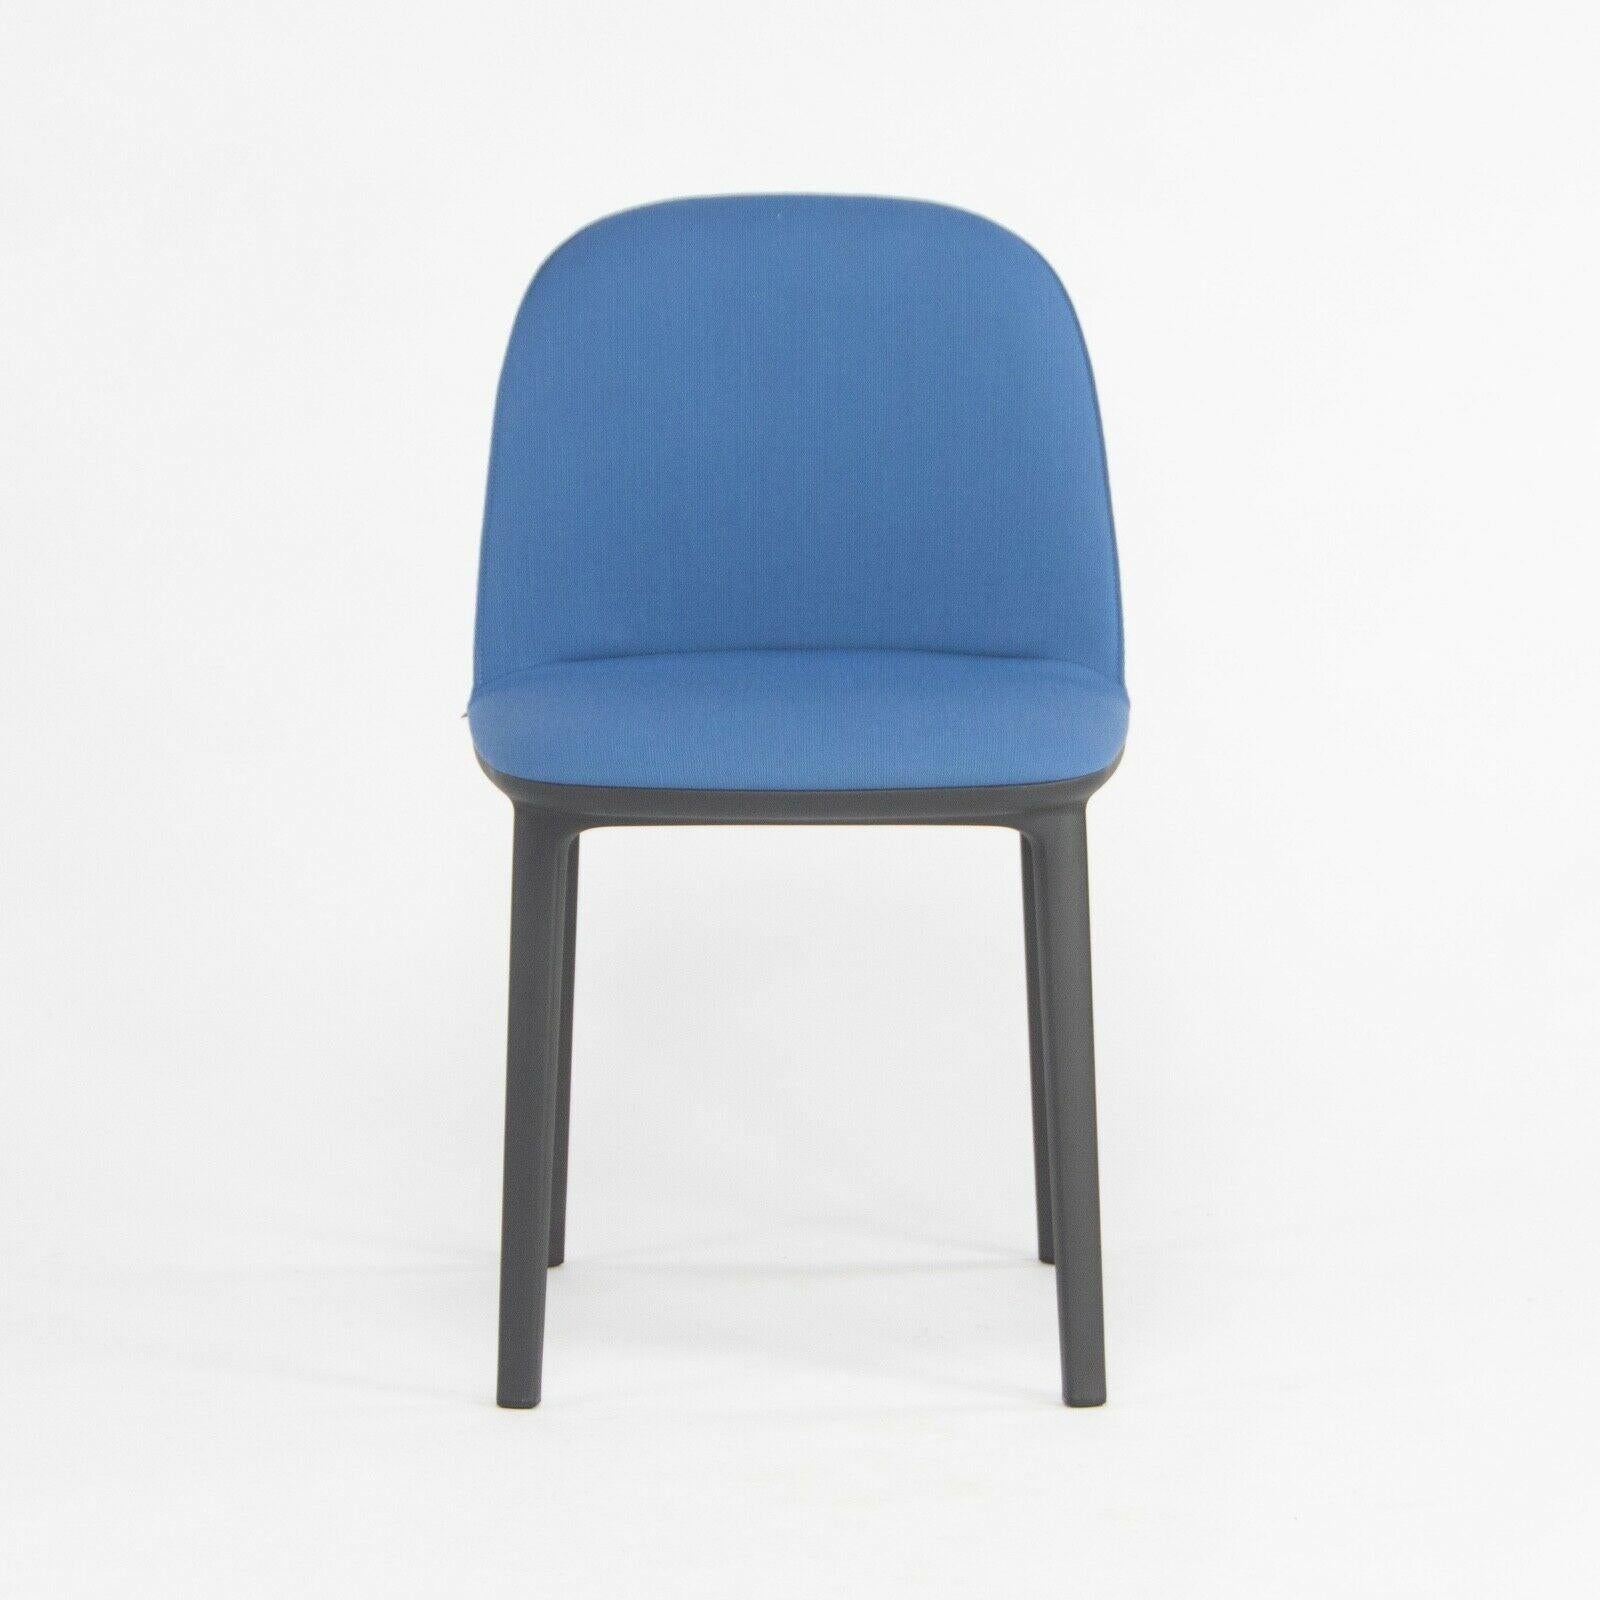 Listed for sale is Softshell Side Chair designed by Ronan and Erwan Bouroullec and produced by Vitra. This chair was constructed with a black plastic base and seat upholstered with light blue fabric. The condition is described as 